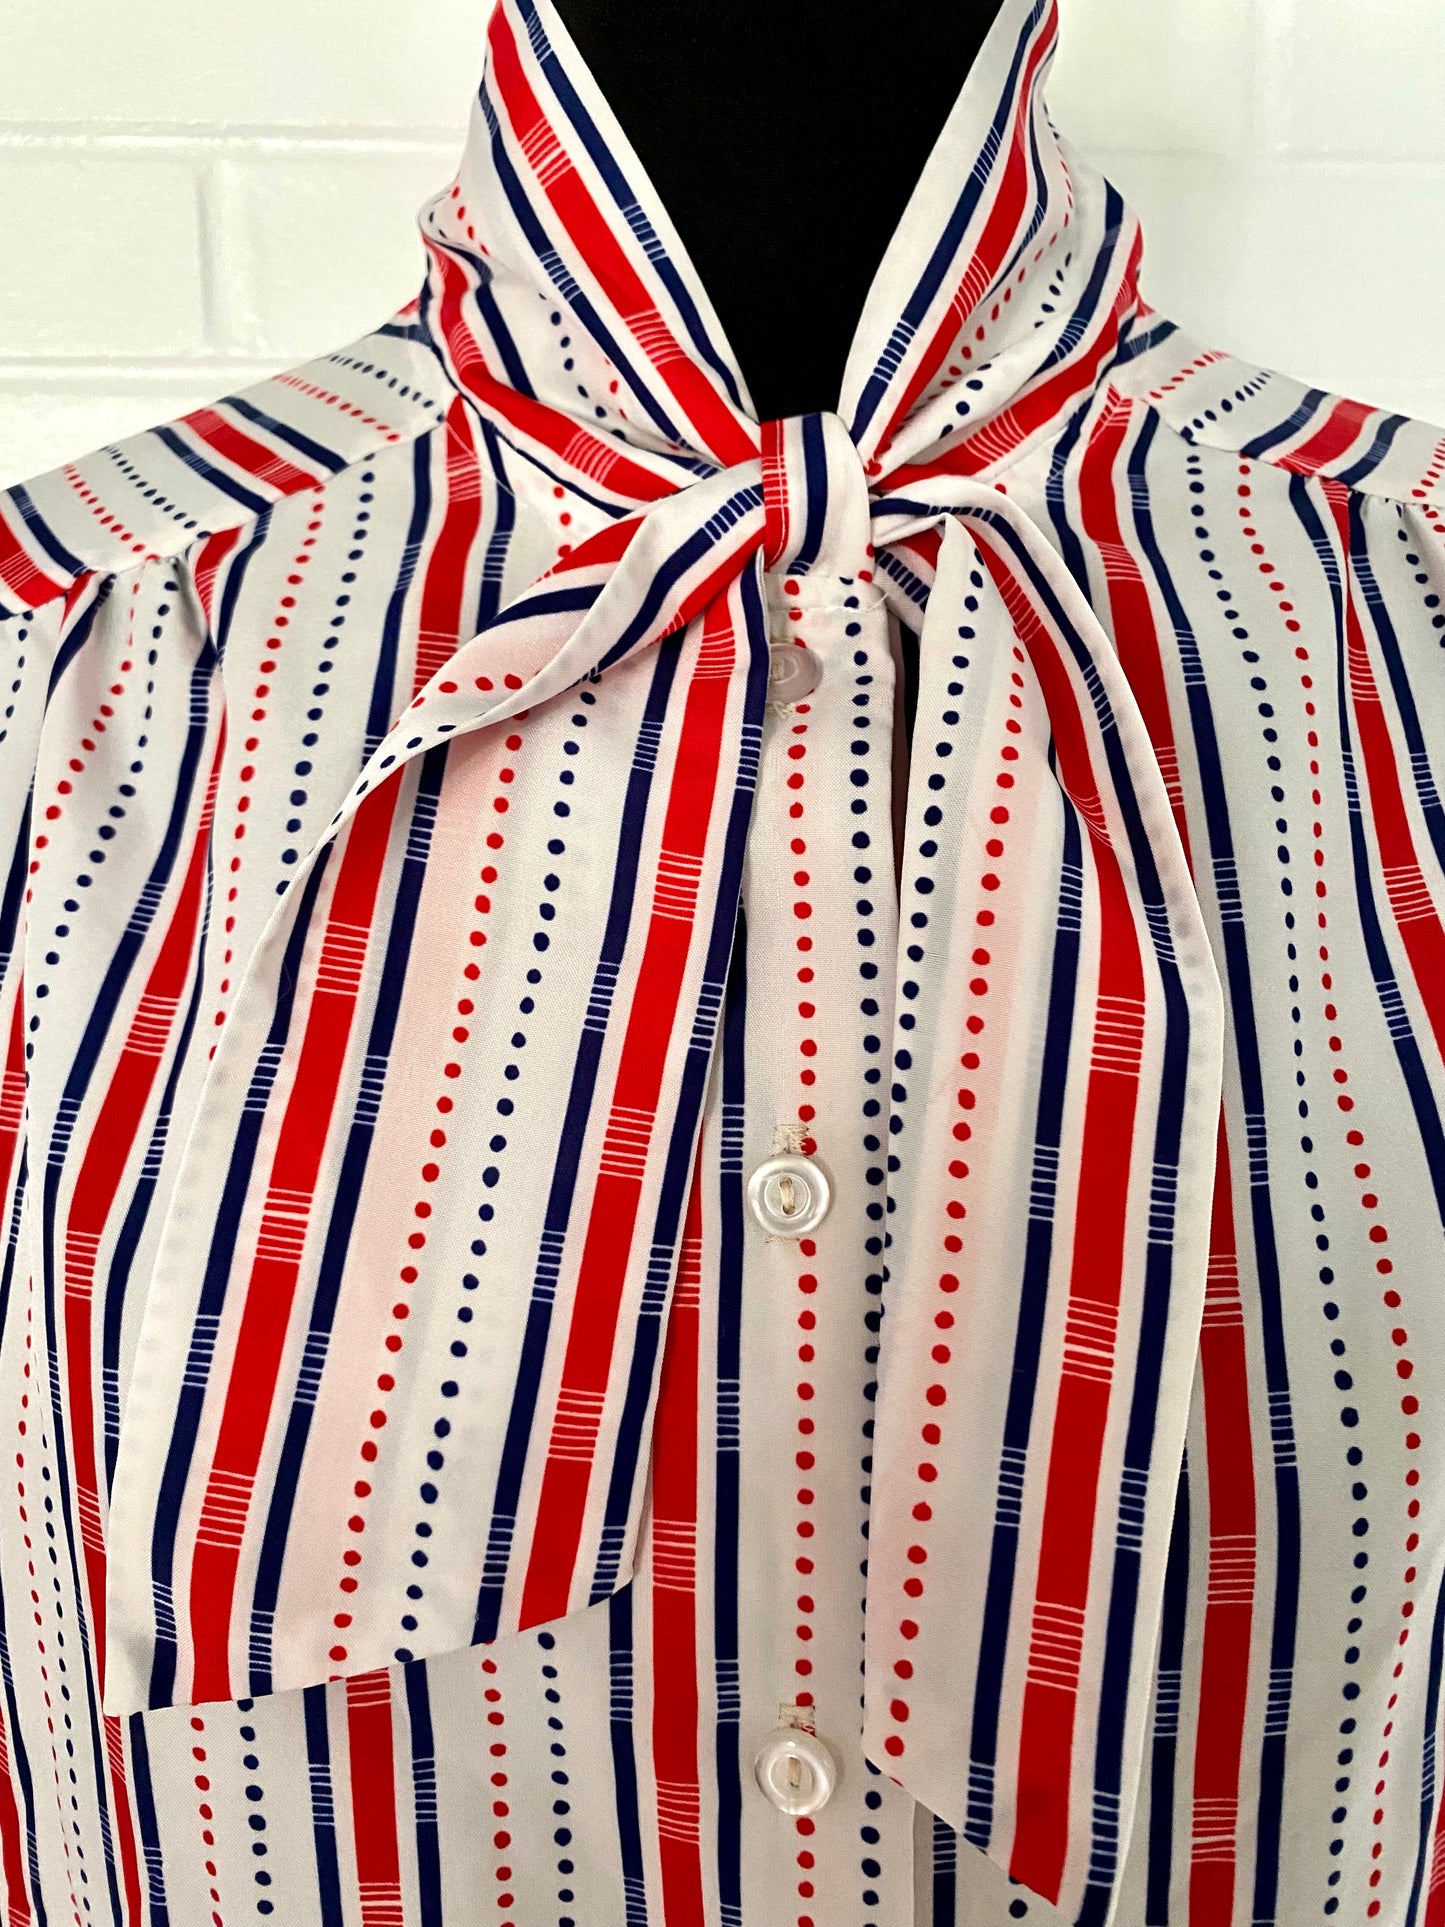 Late 70s/ Early 80s Deere Park Red, White & Blue Blouse